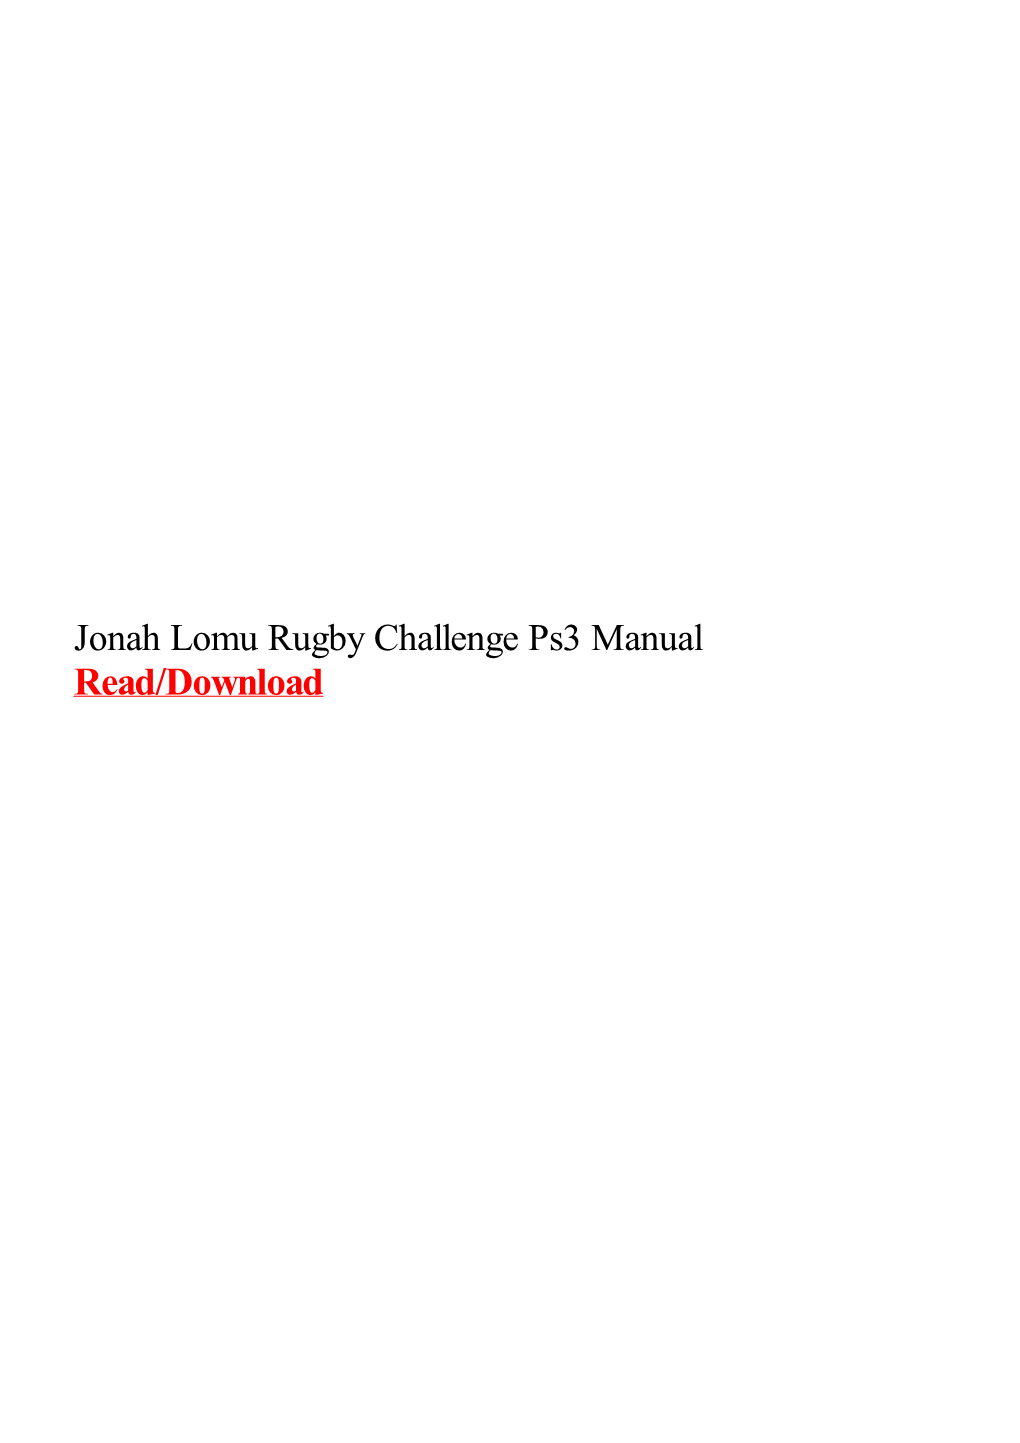 Jonah Lomu Rugby Challenge Ps3 Manual